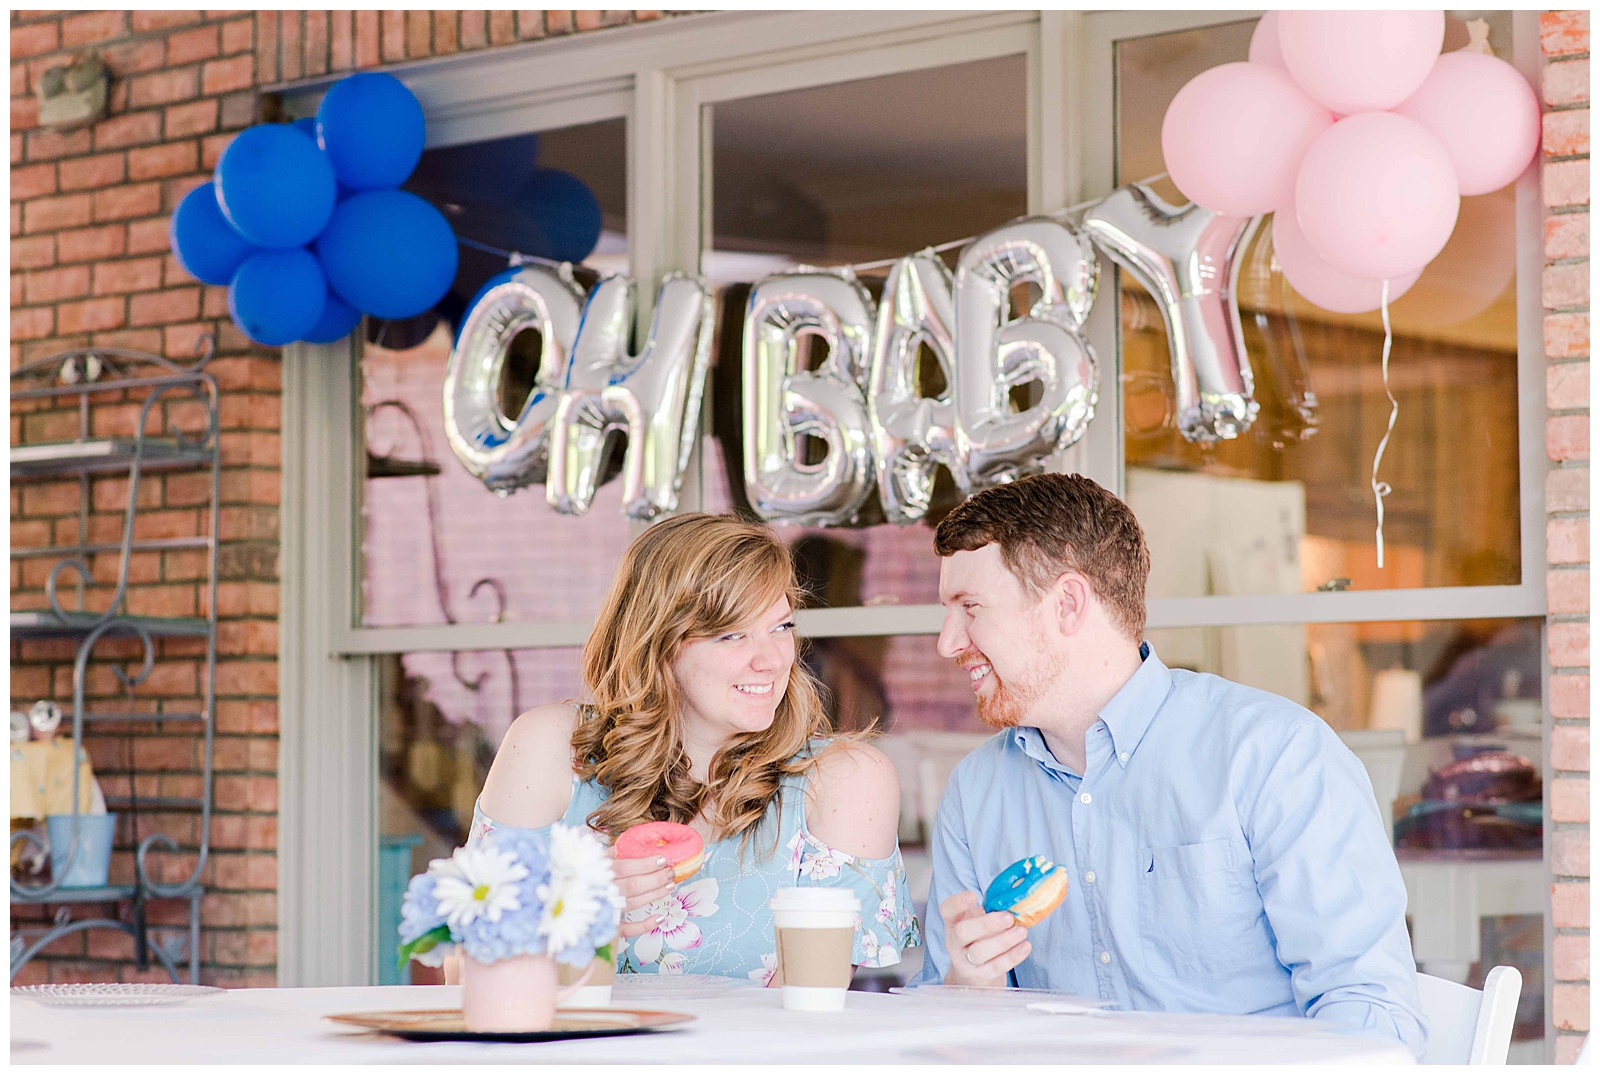 Our Gender Reveal Party 